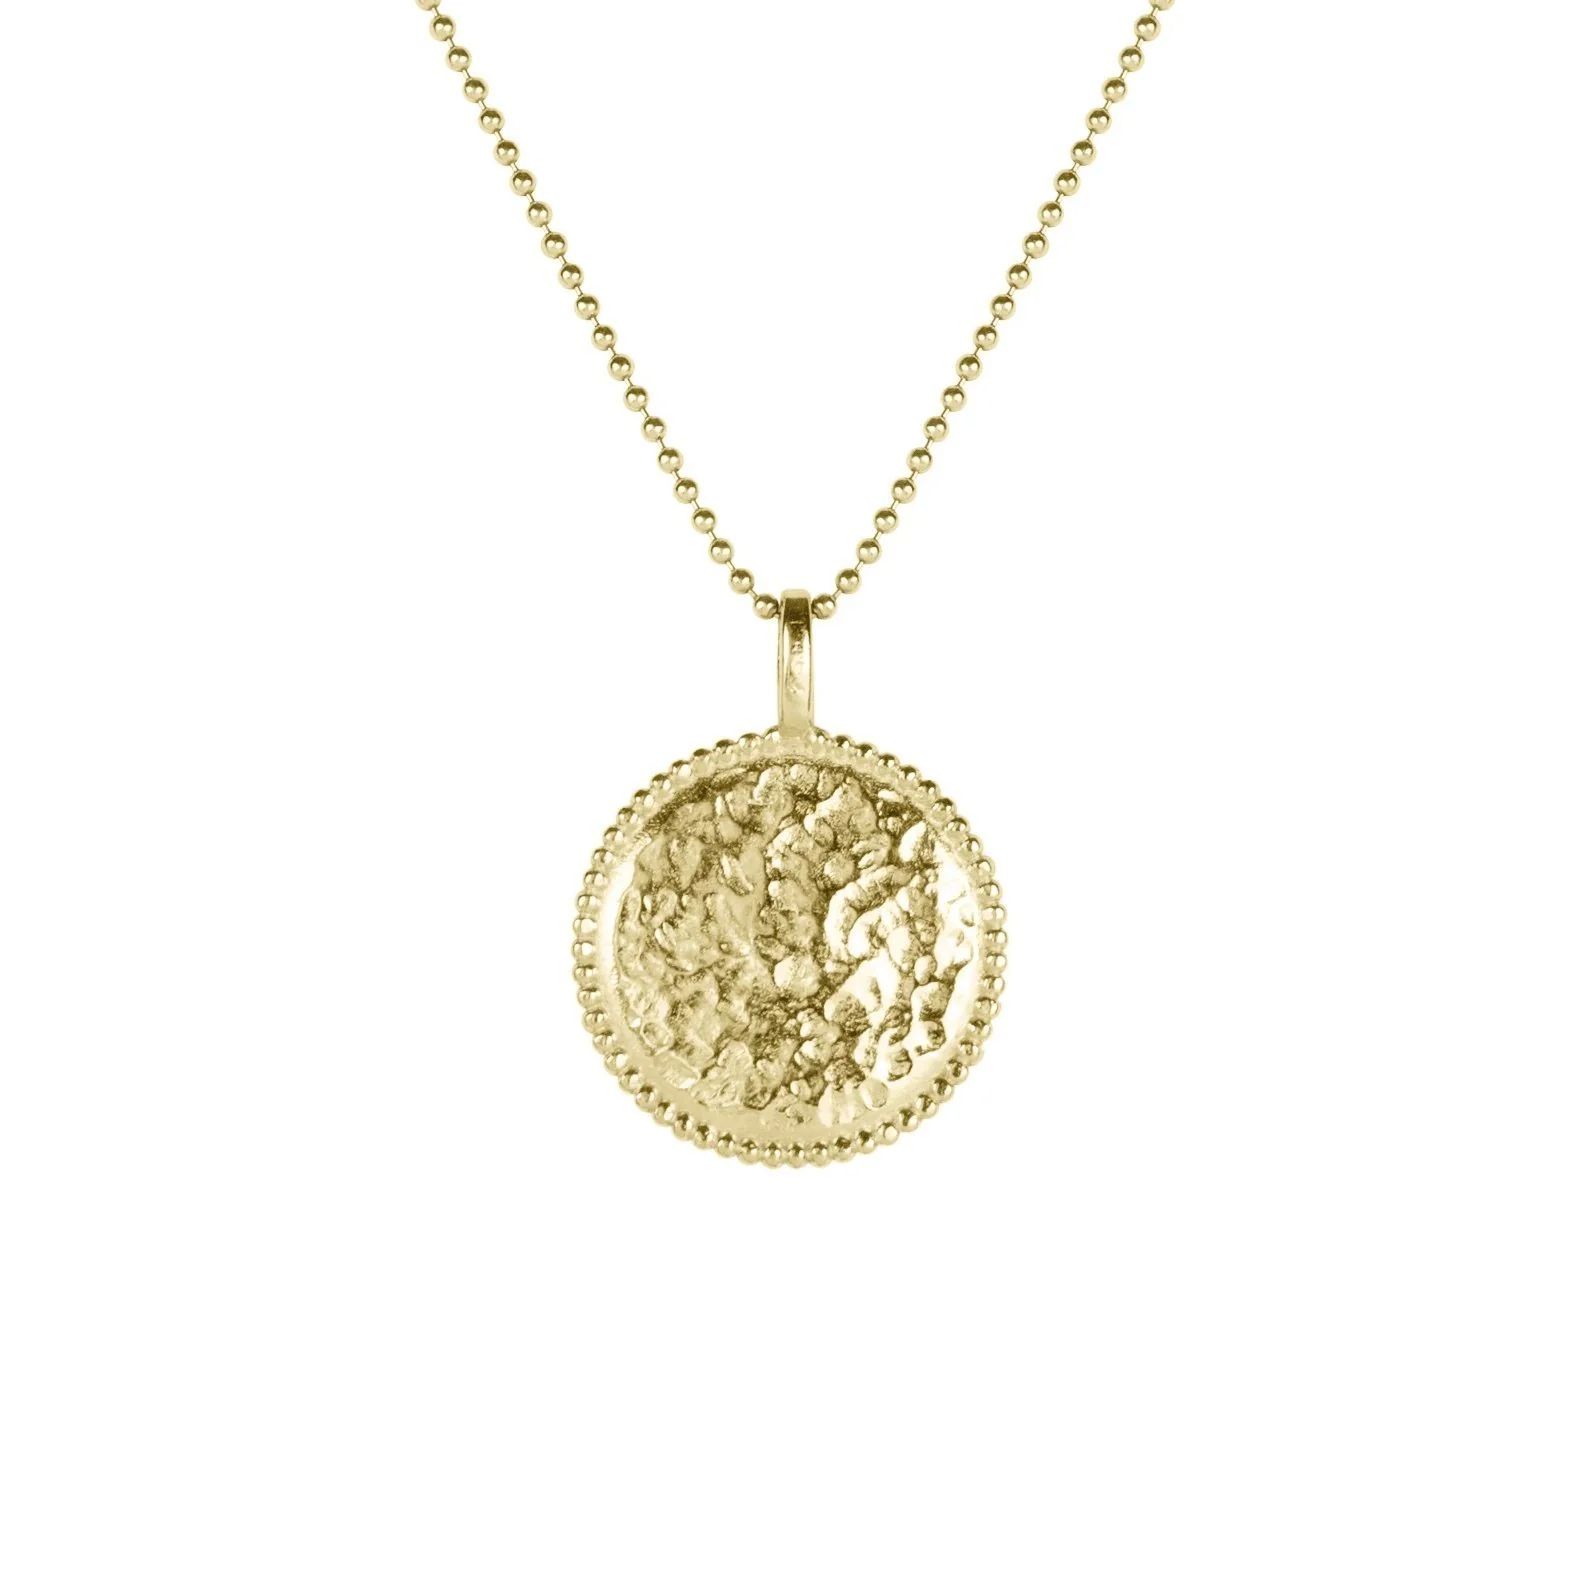 Beaded Coin Necklace | Katie Dean Jewelry